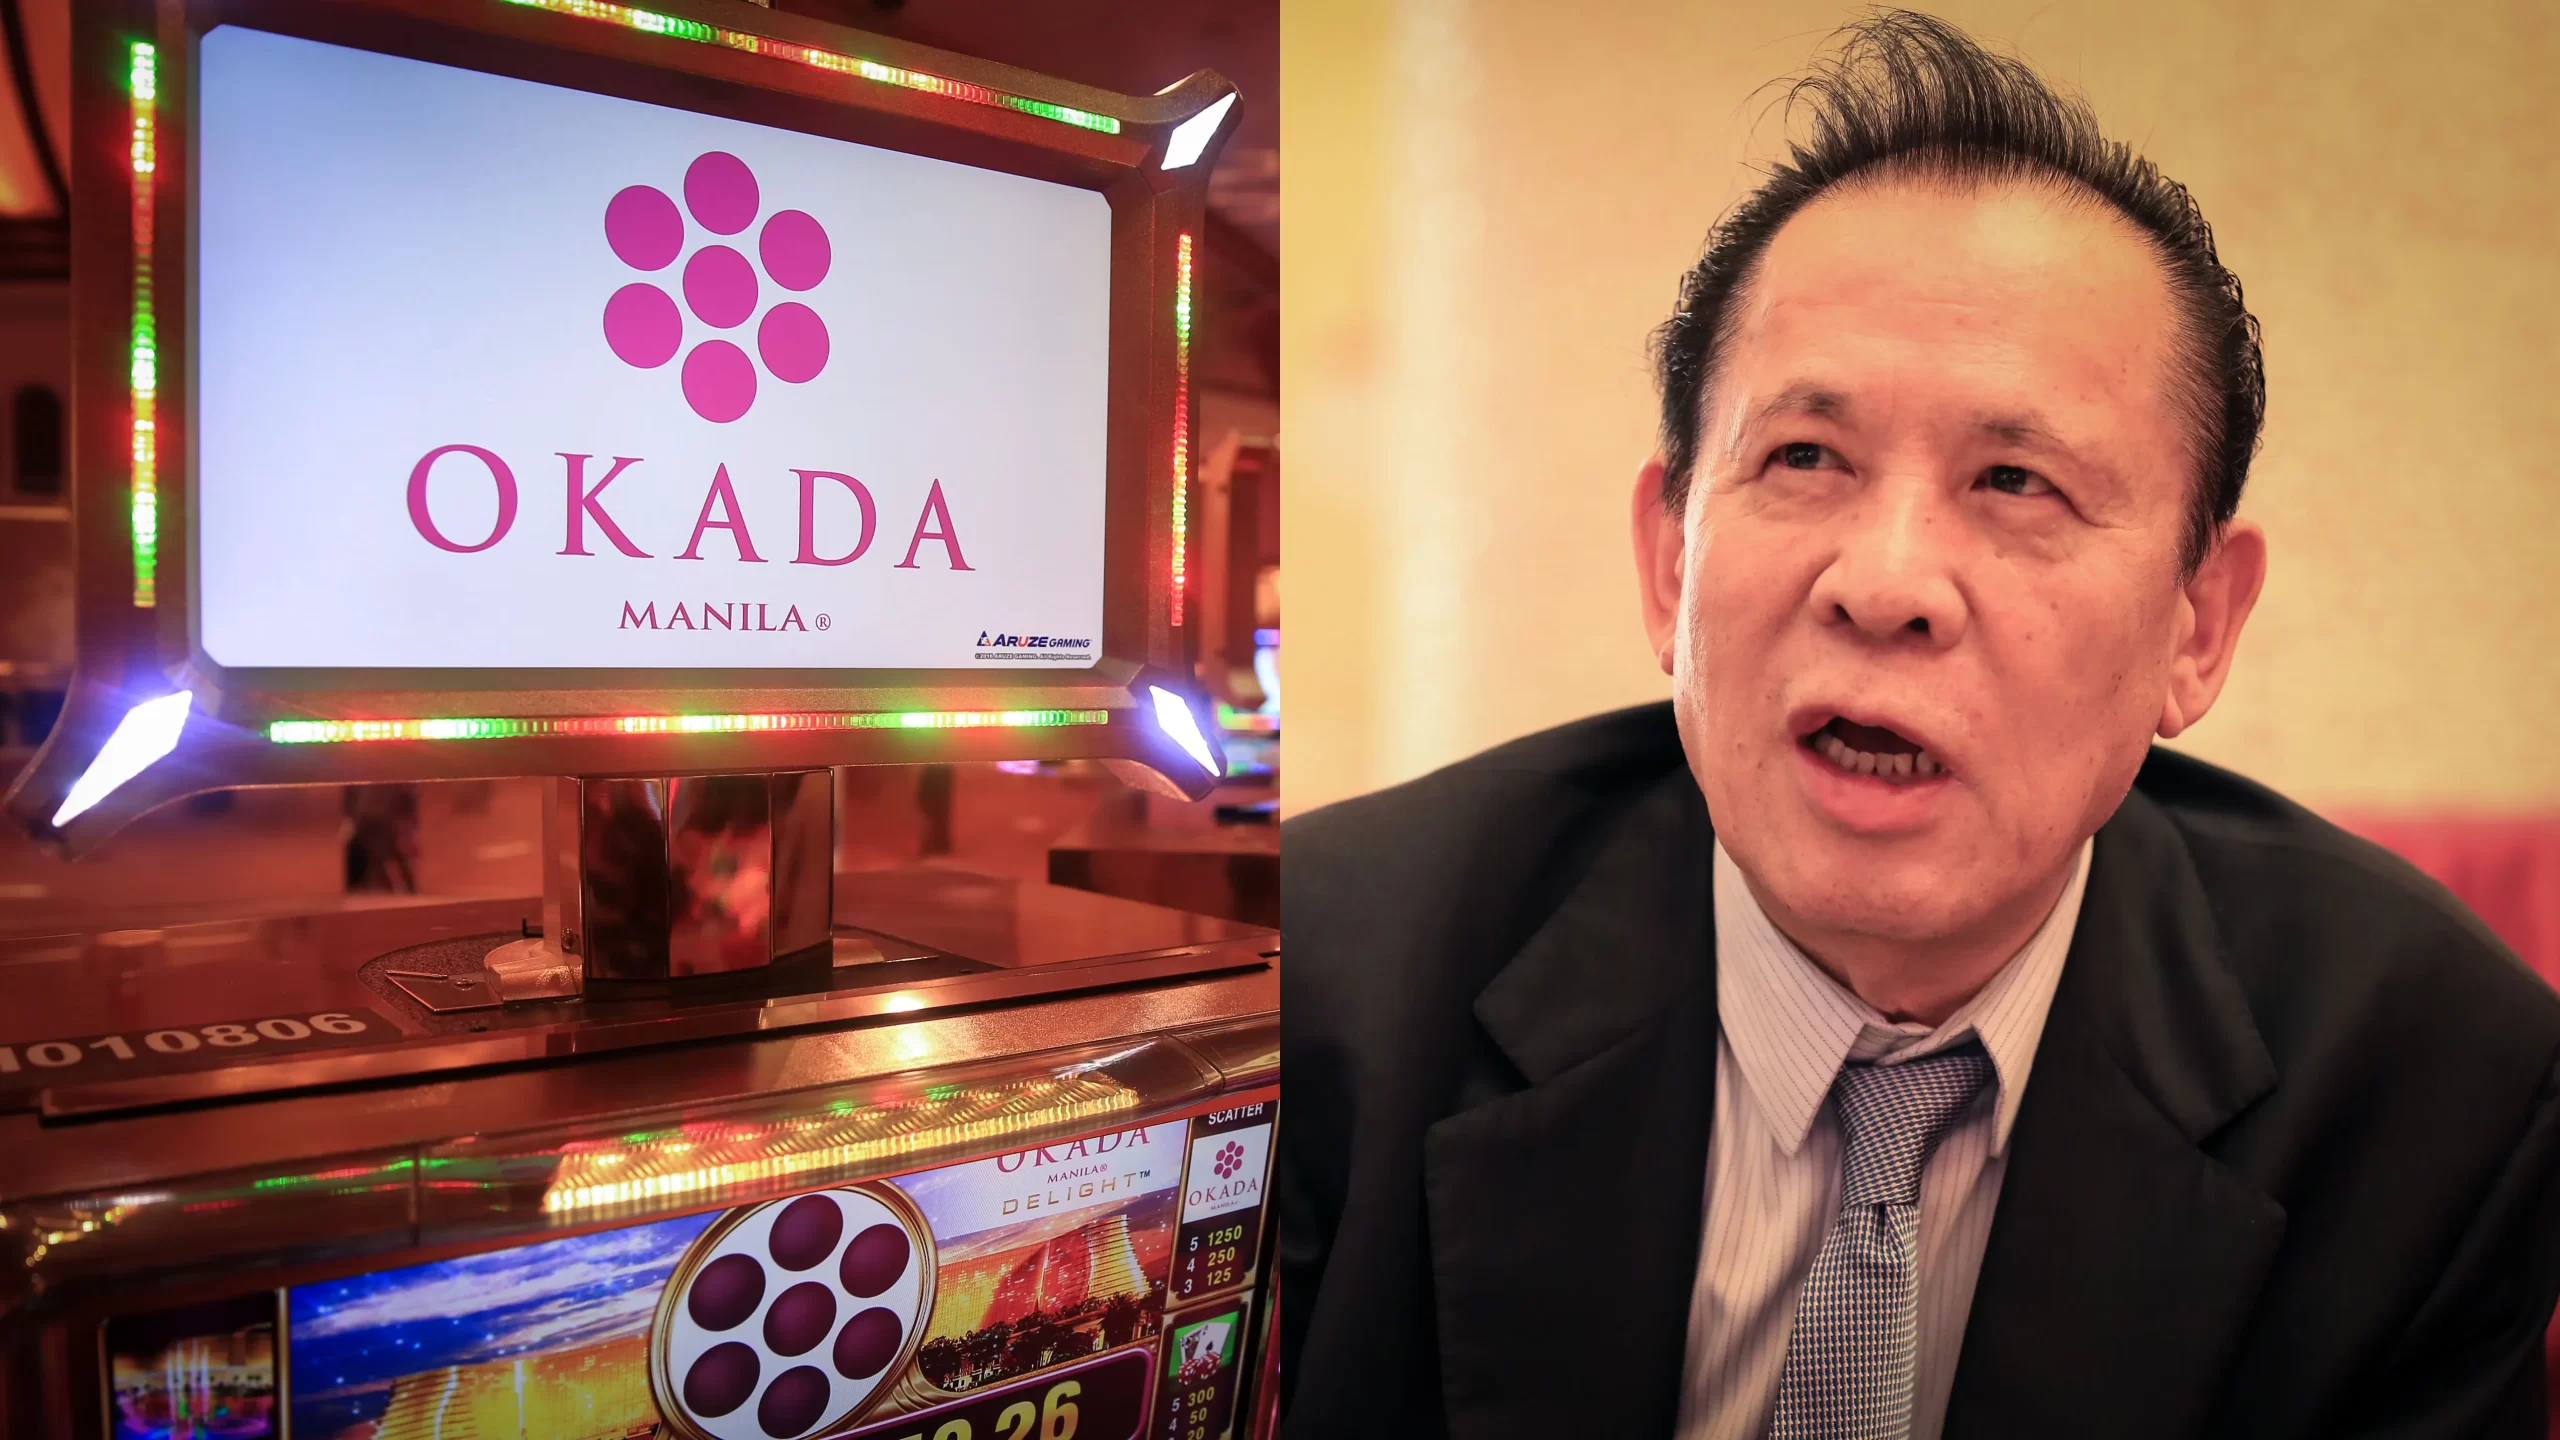 You are currently viewing Unveiling the Fallout: Kazuo Okada’s Removal from Okada Manila